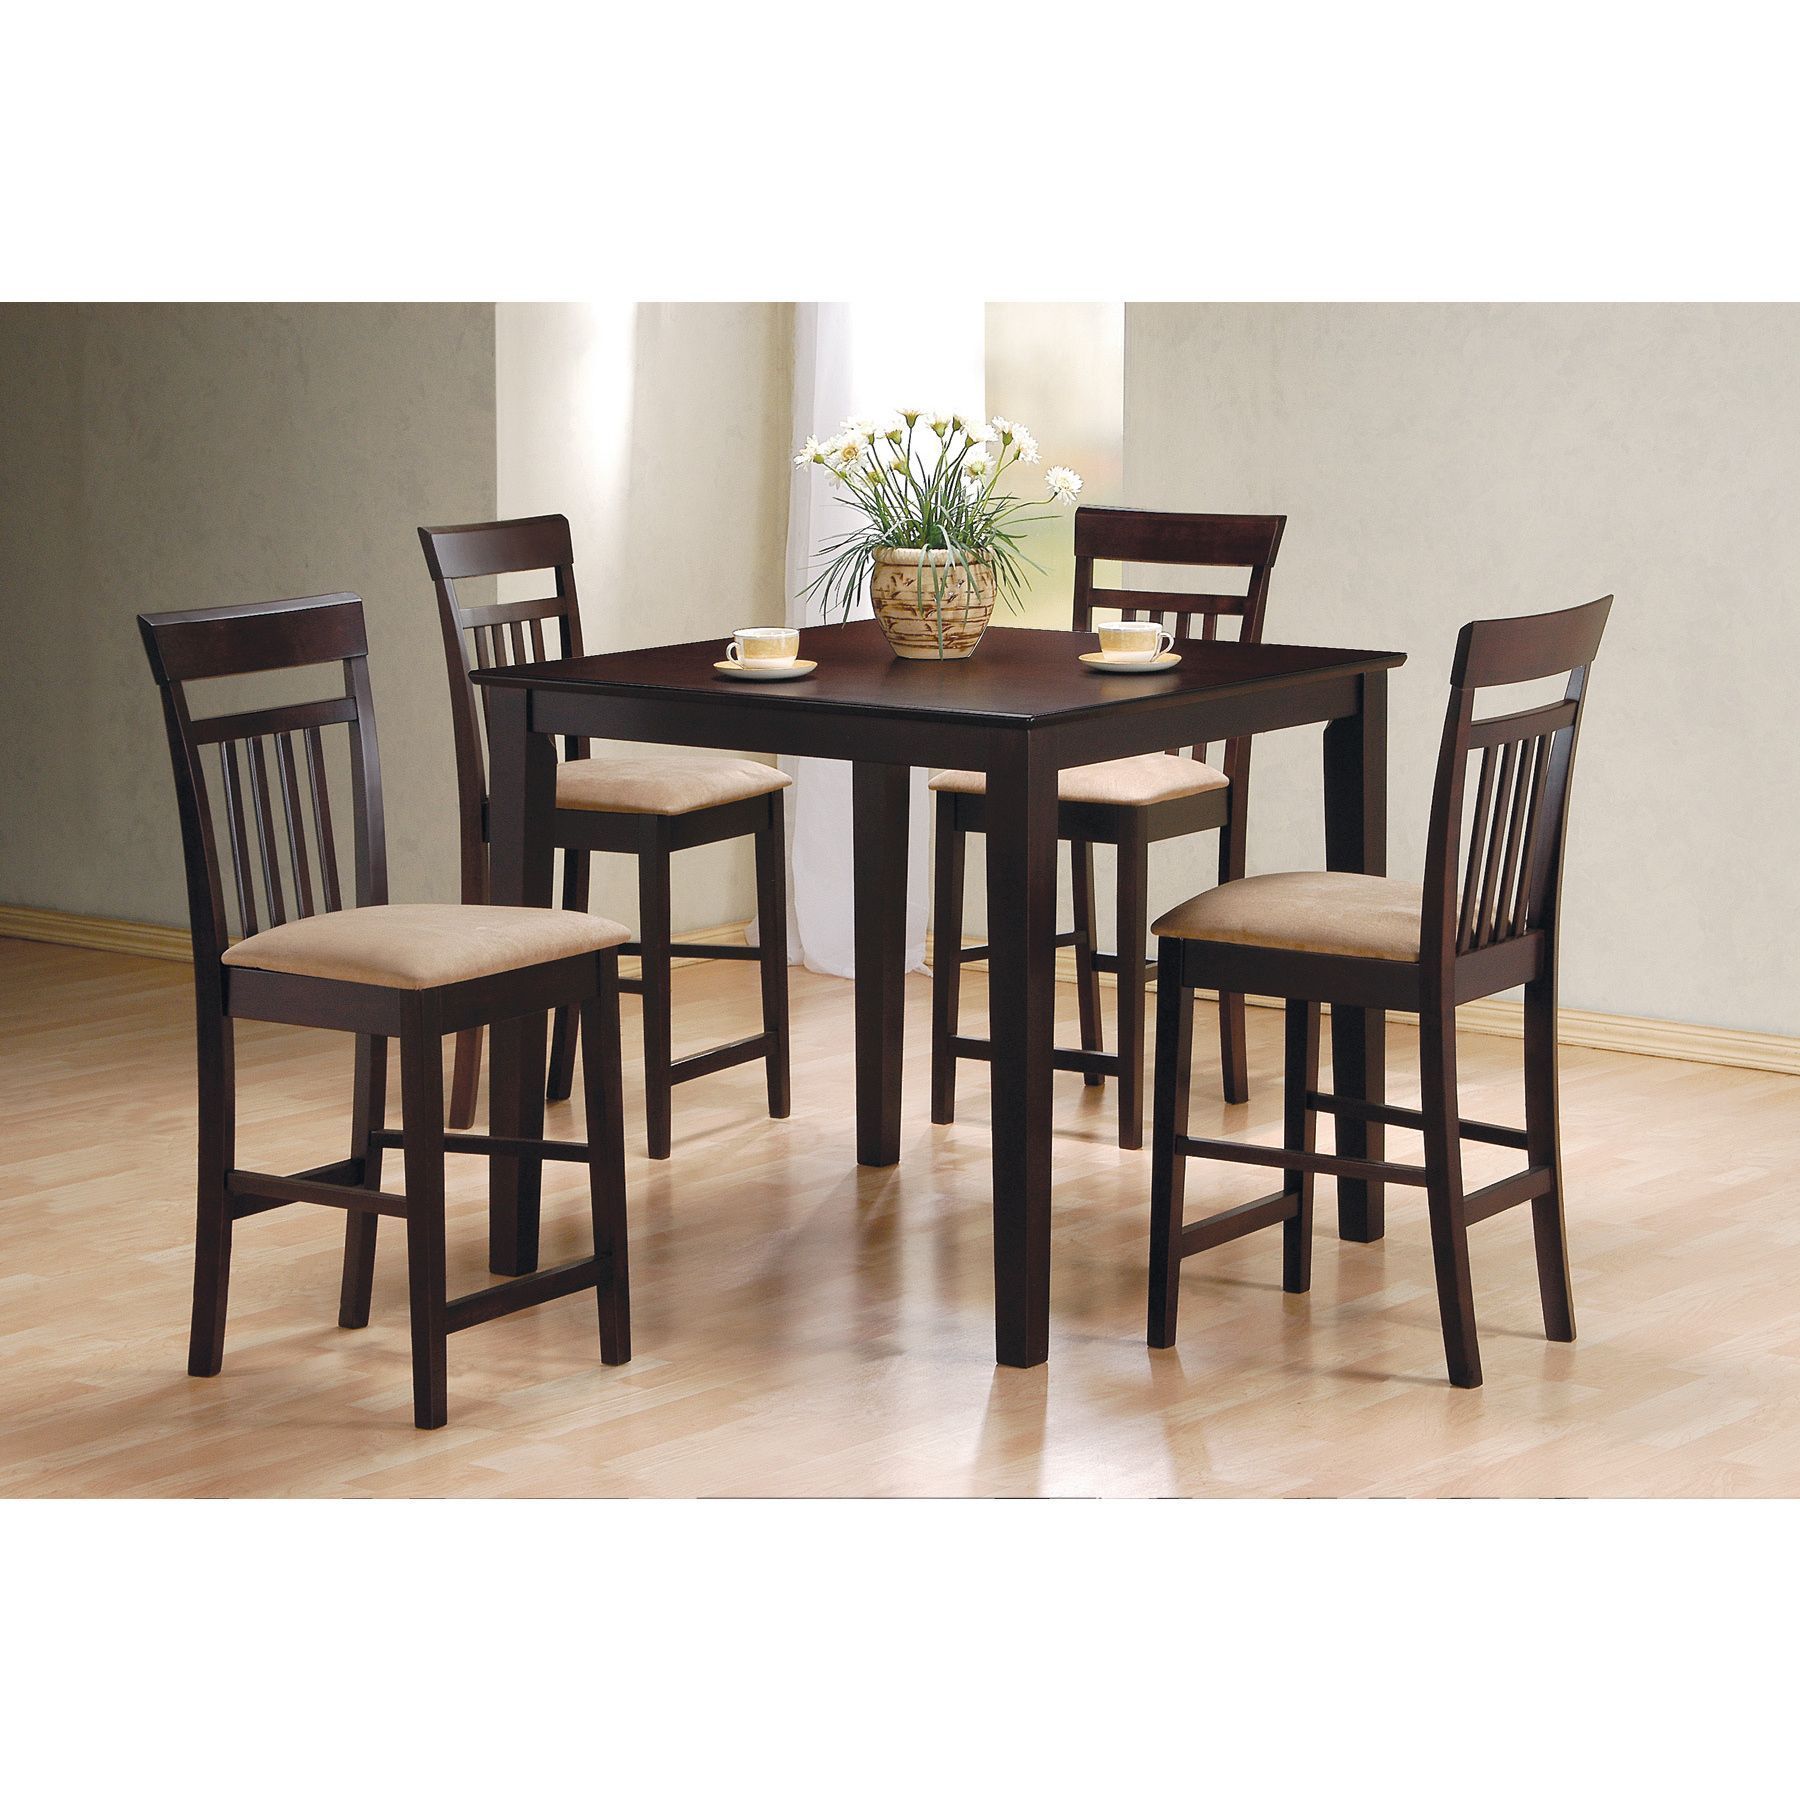 Coaster Company Cappuccino 5 Piece Dining Set (Cappuccino Counter Pertaining To Newest Miskell 5 Piece Dining Sets (Photo 7 of 20)